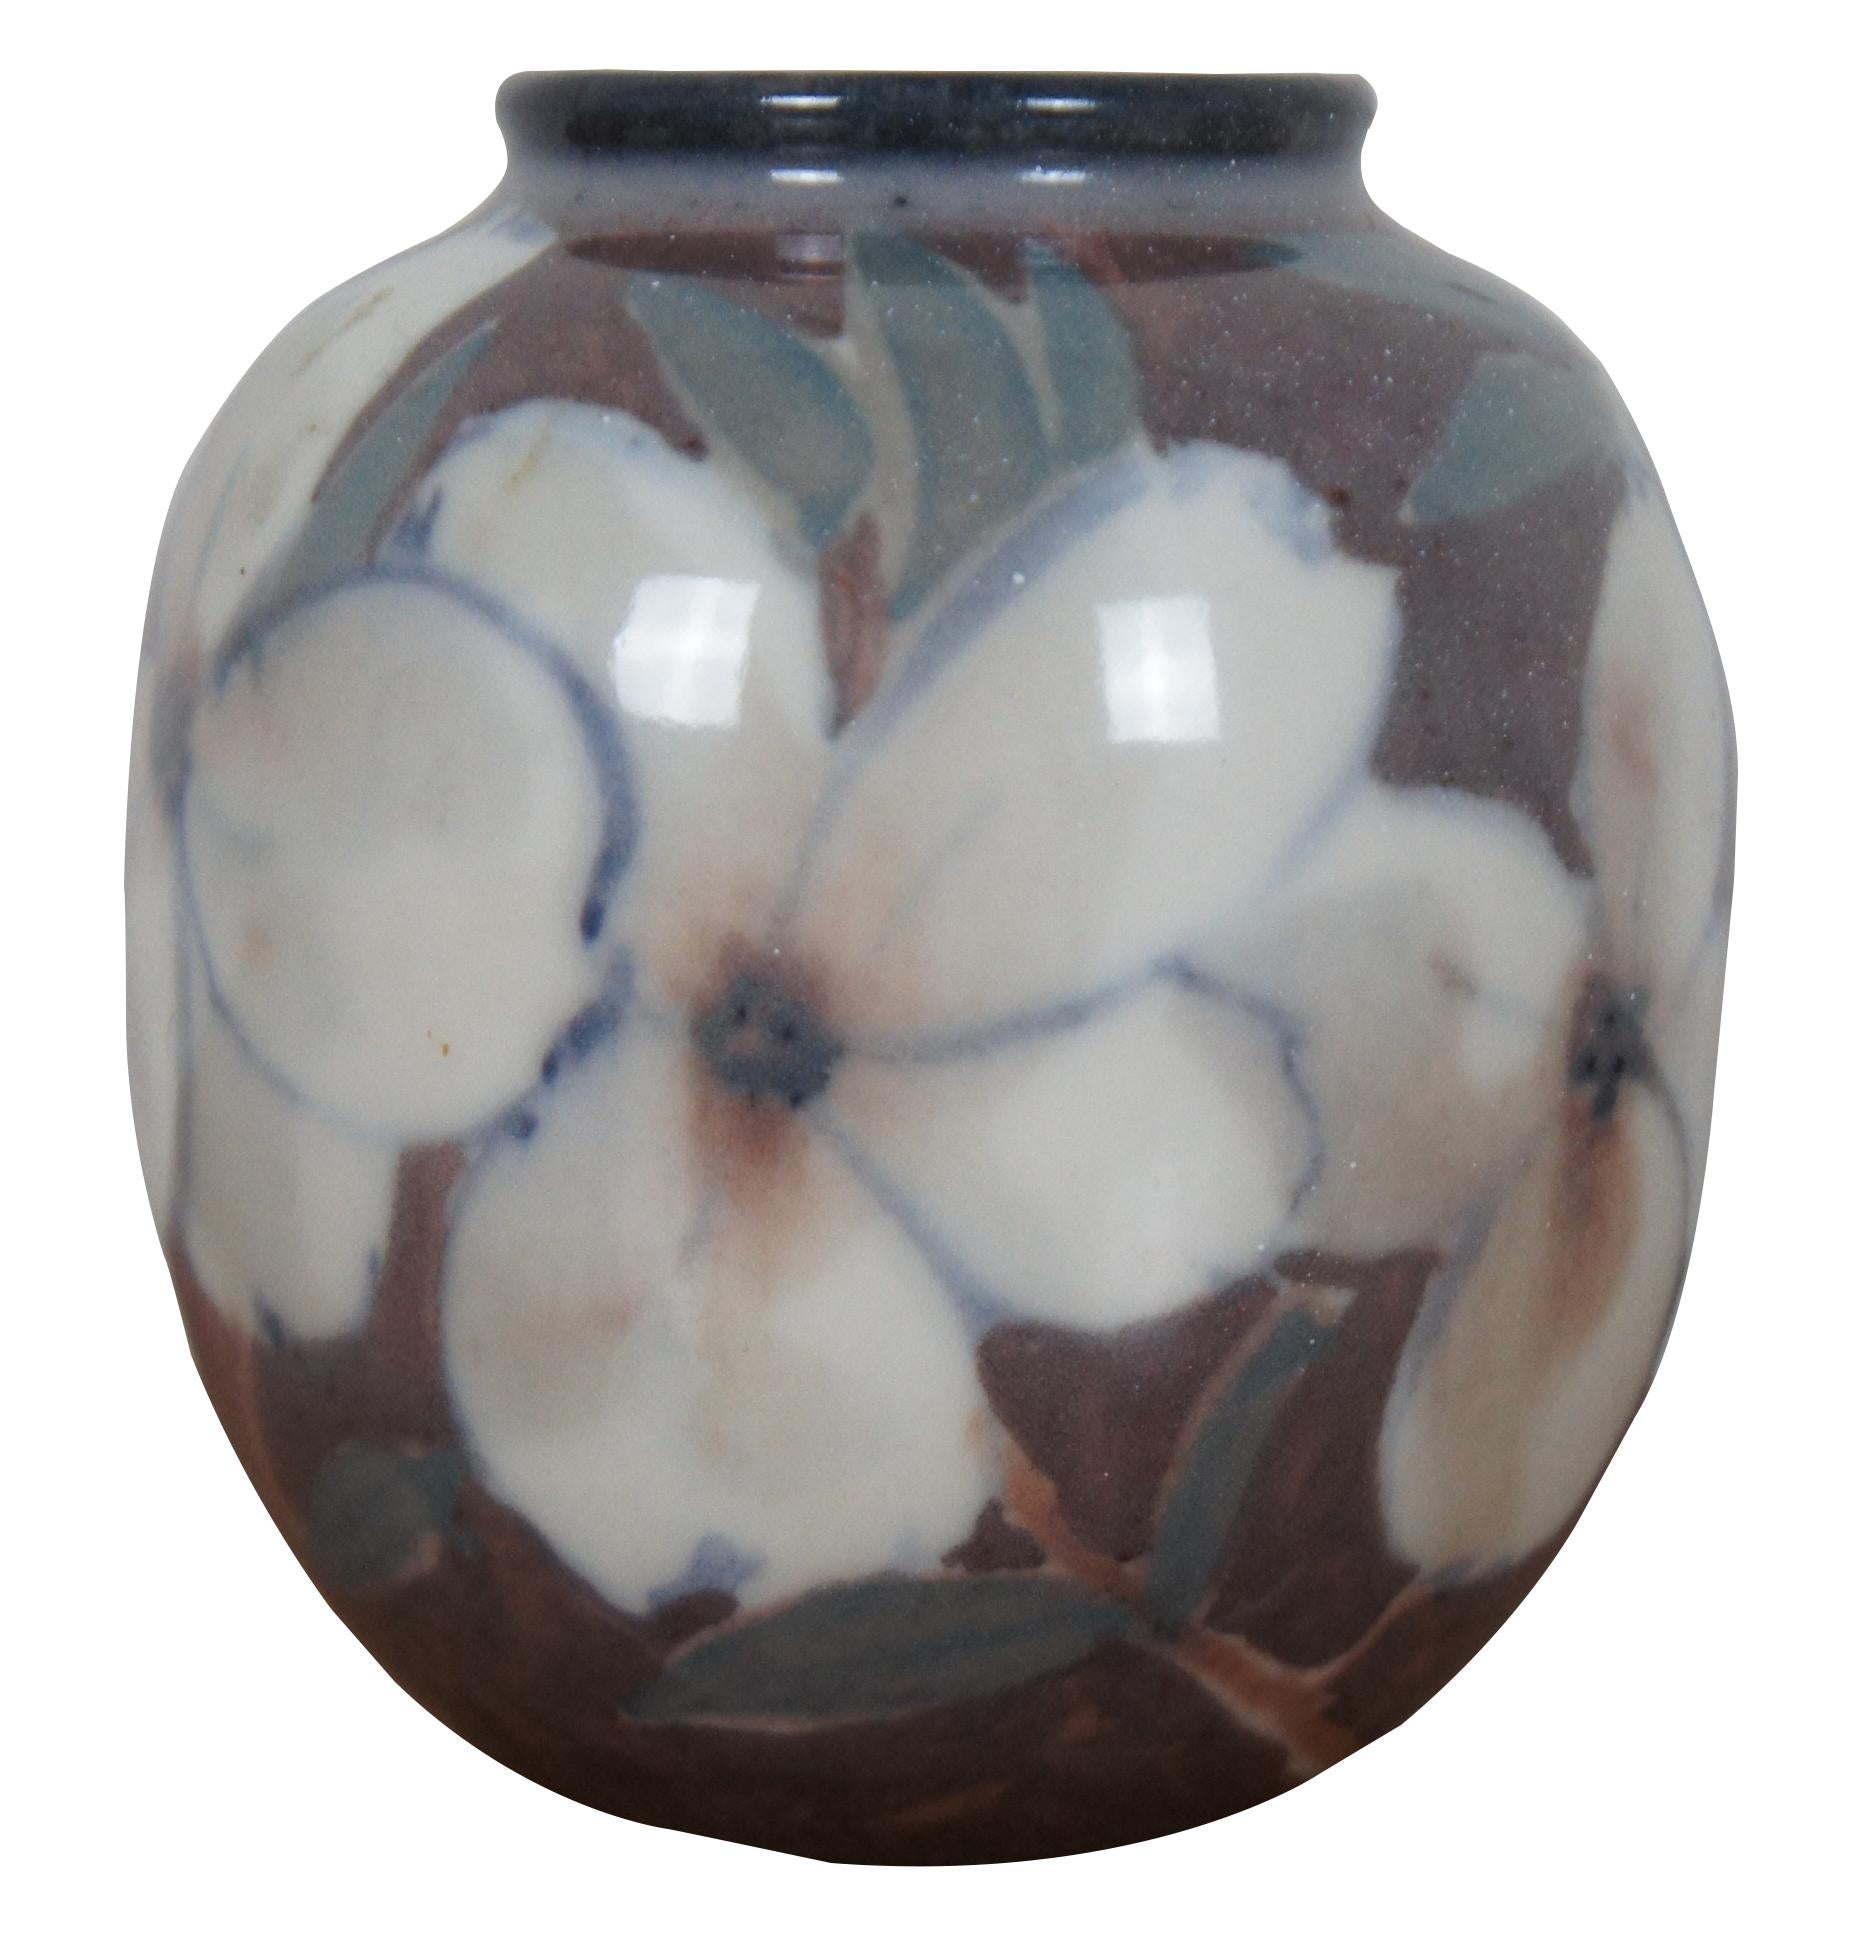 Antique 1944 Rookwood Pottery porcelain vase with a floral design by Jens Jensen featuring white dogwood or magnolia blossoms on a mottled brown ground.

 